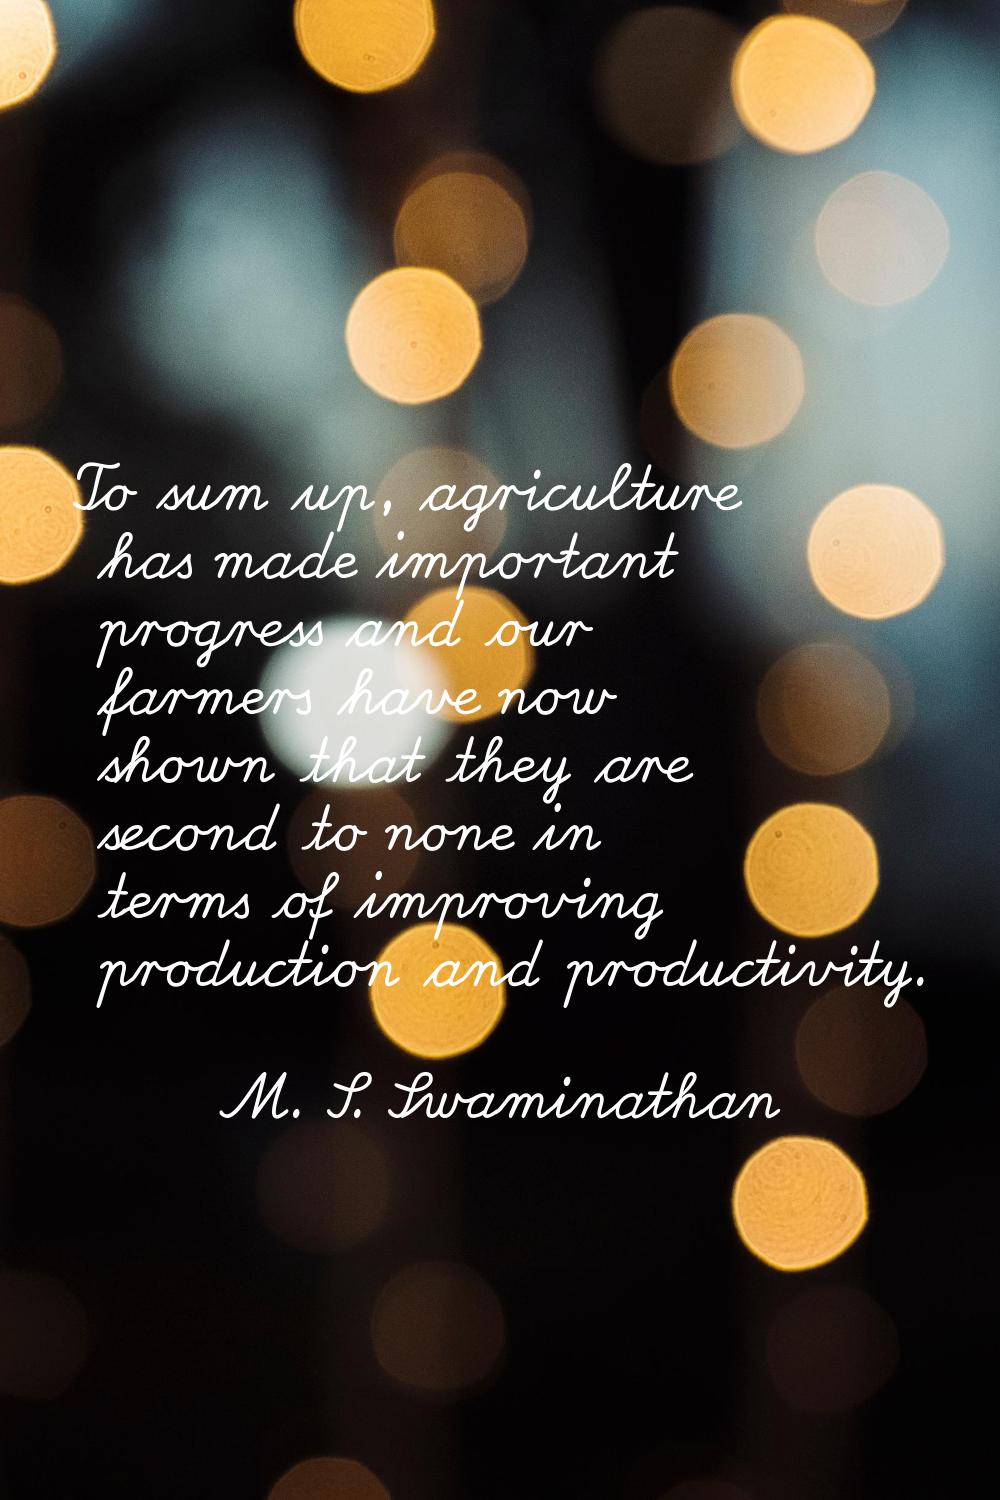 To sum up, agriculture has made important progress and our farmers have now shown that they are sec